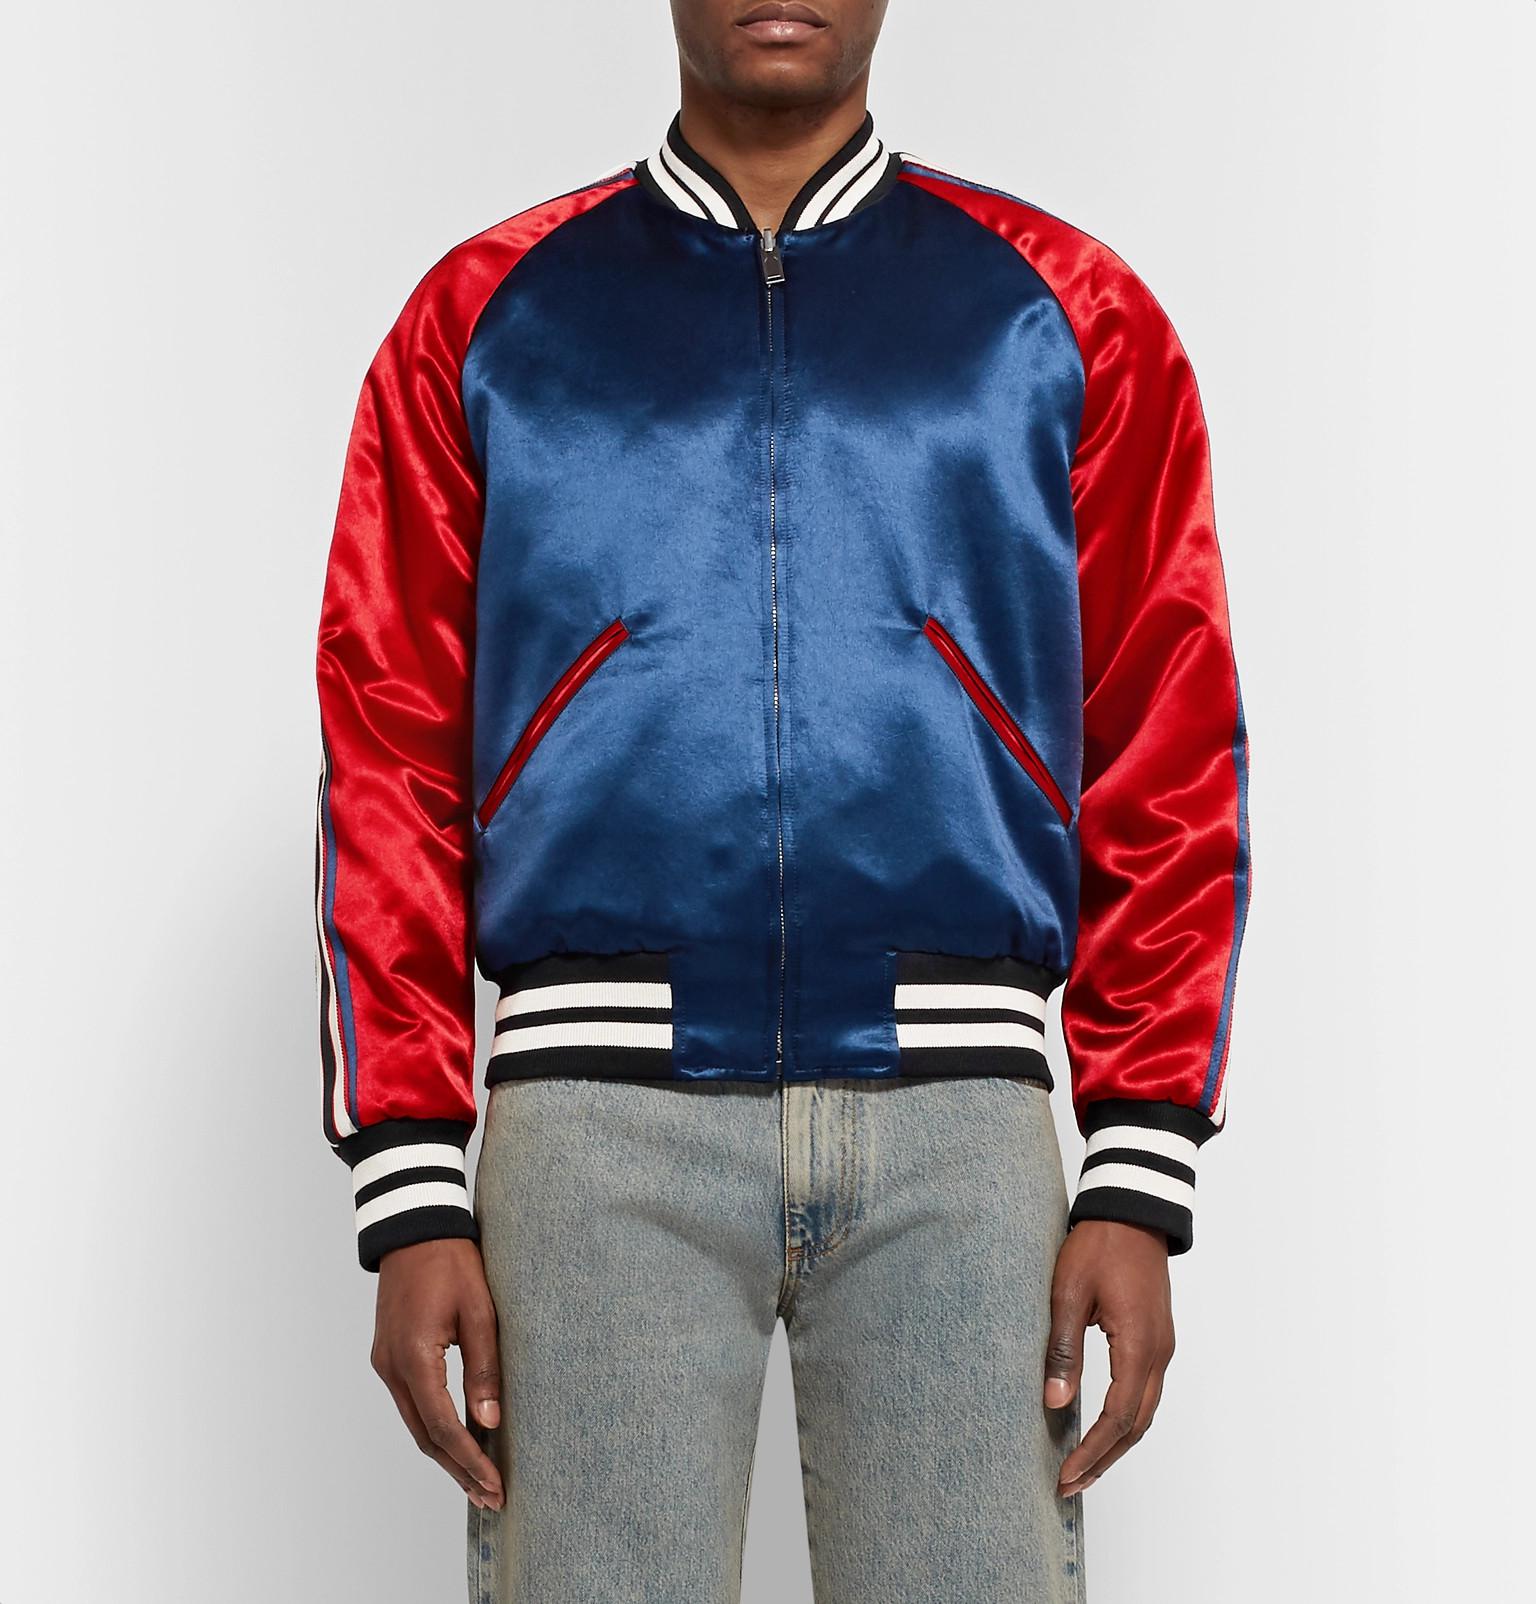 Gucci Reversible Acetate Bomber in Navy Red (Blue) Men - Lyst